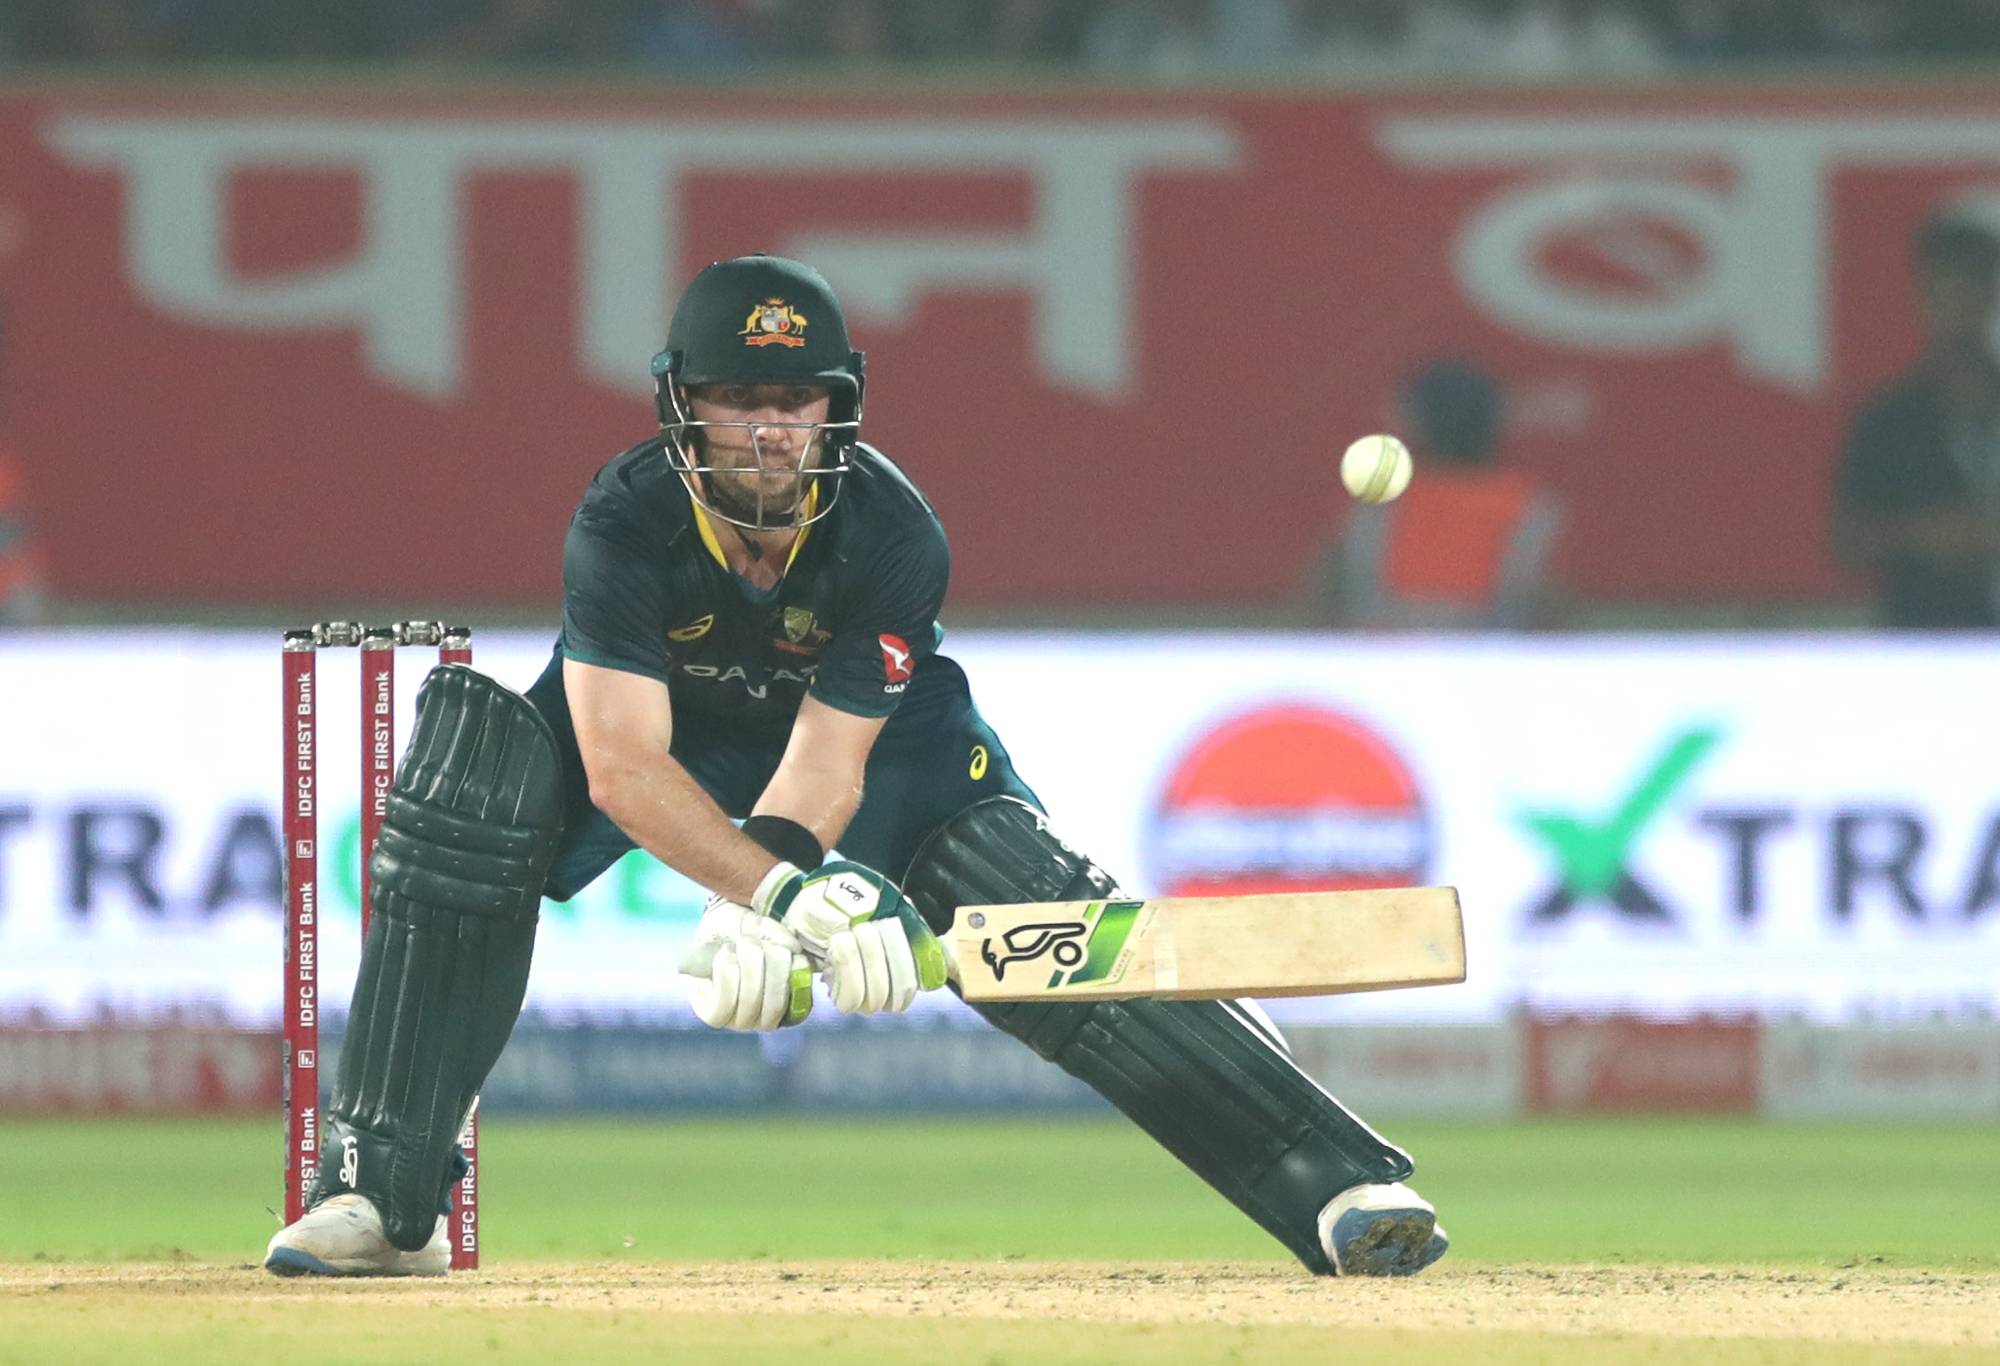 VISAKHAPATNAM, INDIA - NOVEMBER 23: Australia's Josh Inglis plays a shot during game one of the T20 International Series between India and Australia at Dr YS Rajasekhara Reddy ACA-VDCA Stadium on November 23, 2023 in Visakhapatnam, India. (Photo by Pankaj Nangia/Getty Images)